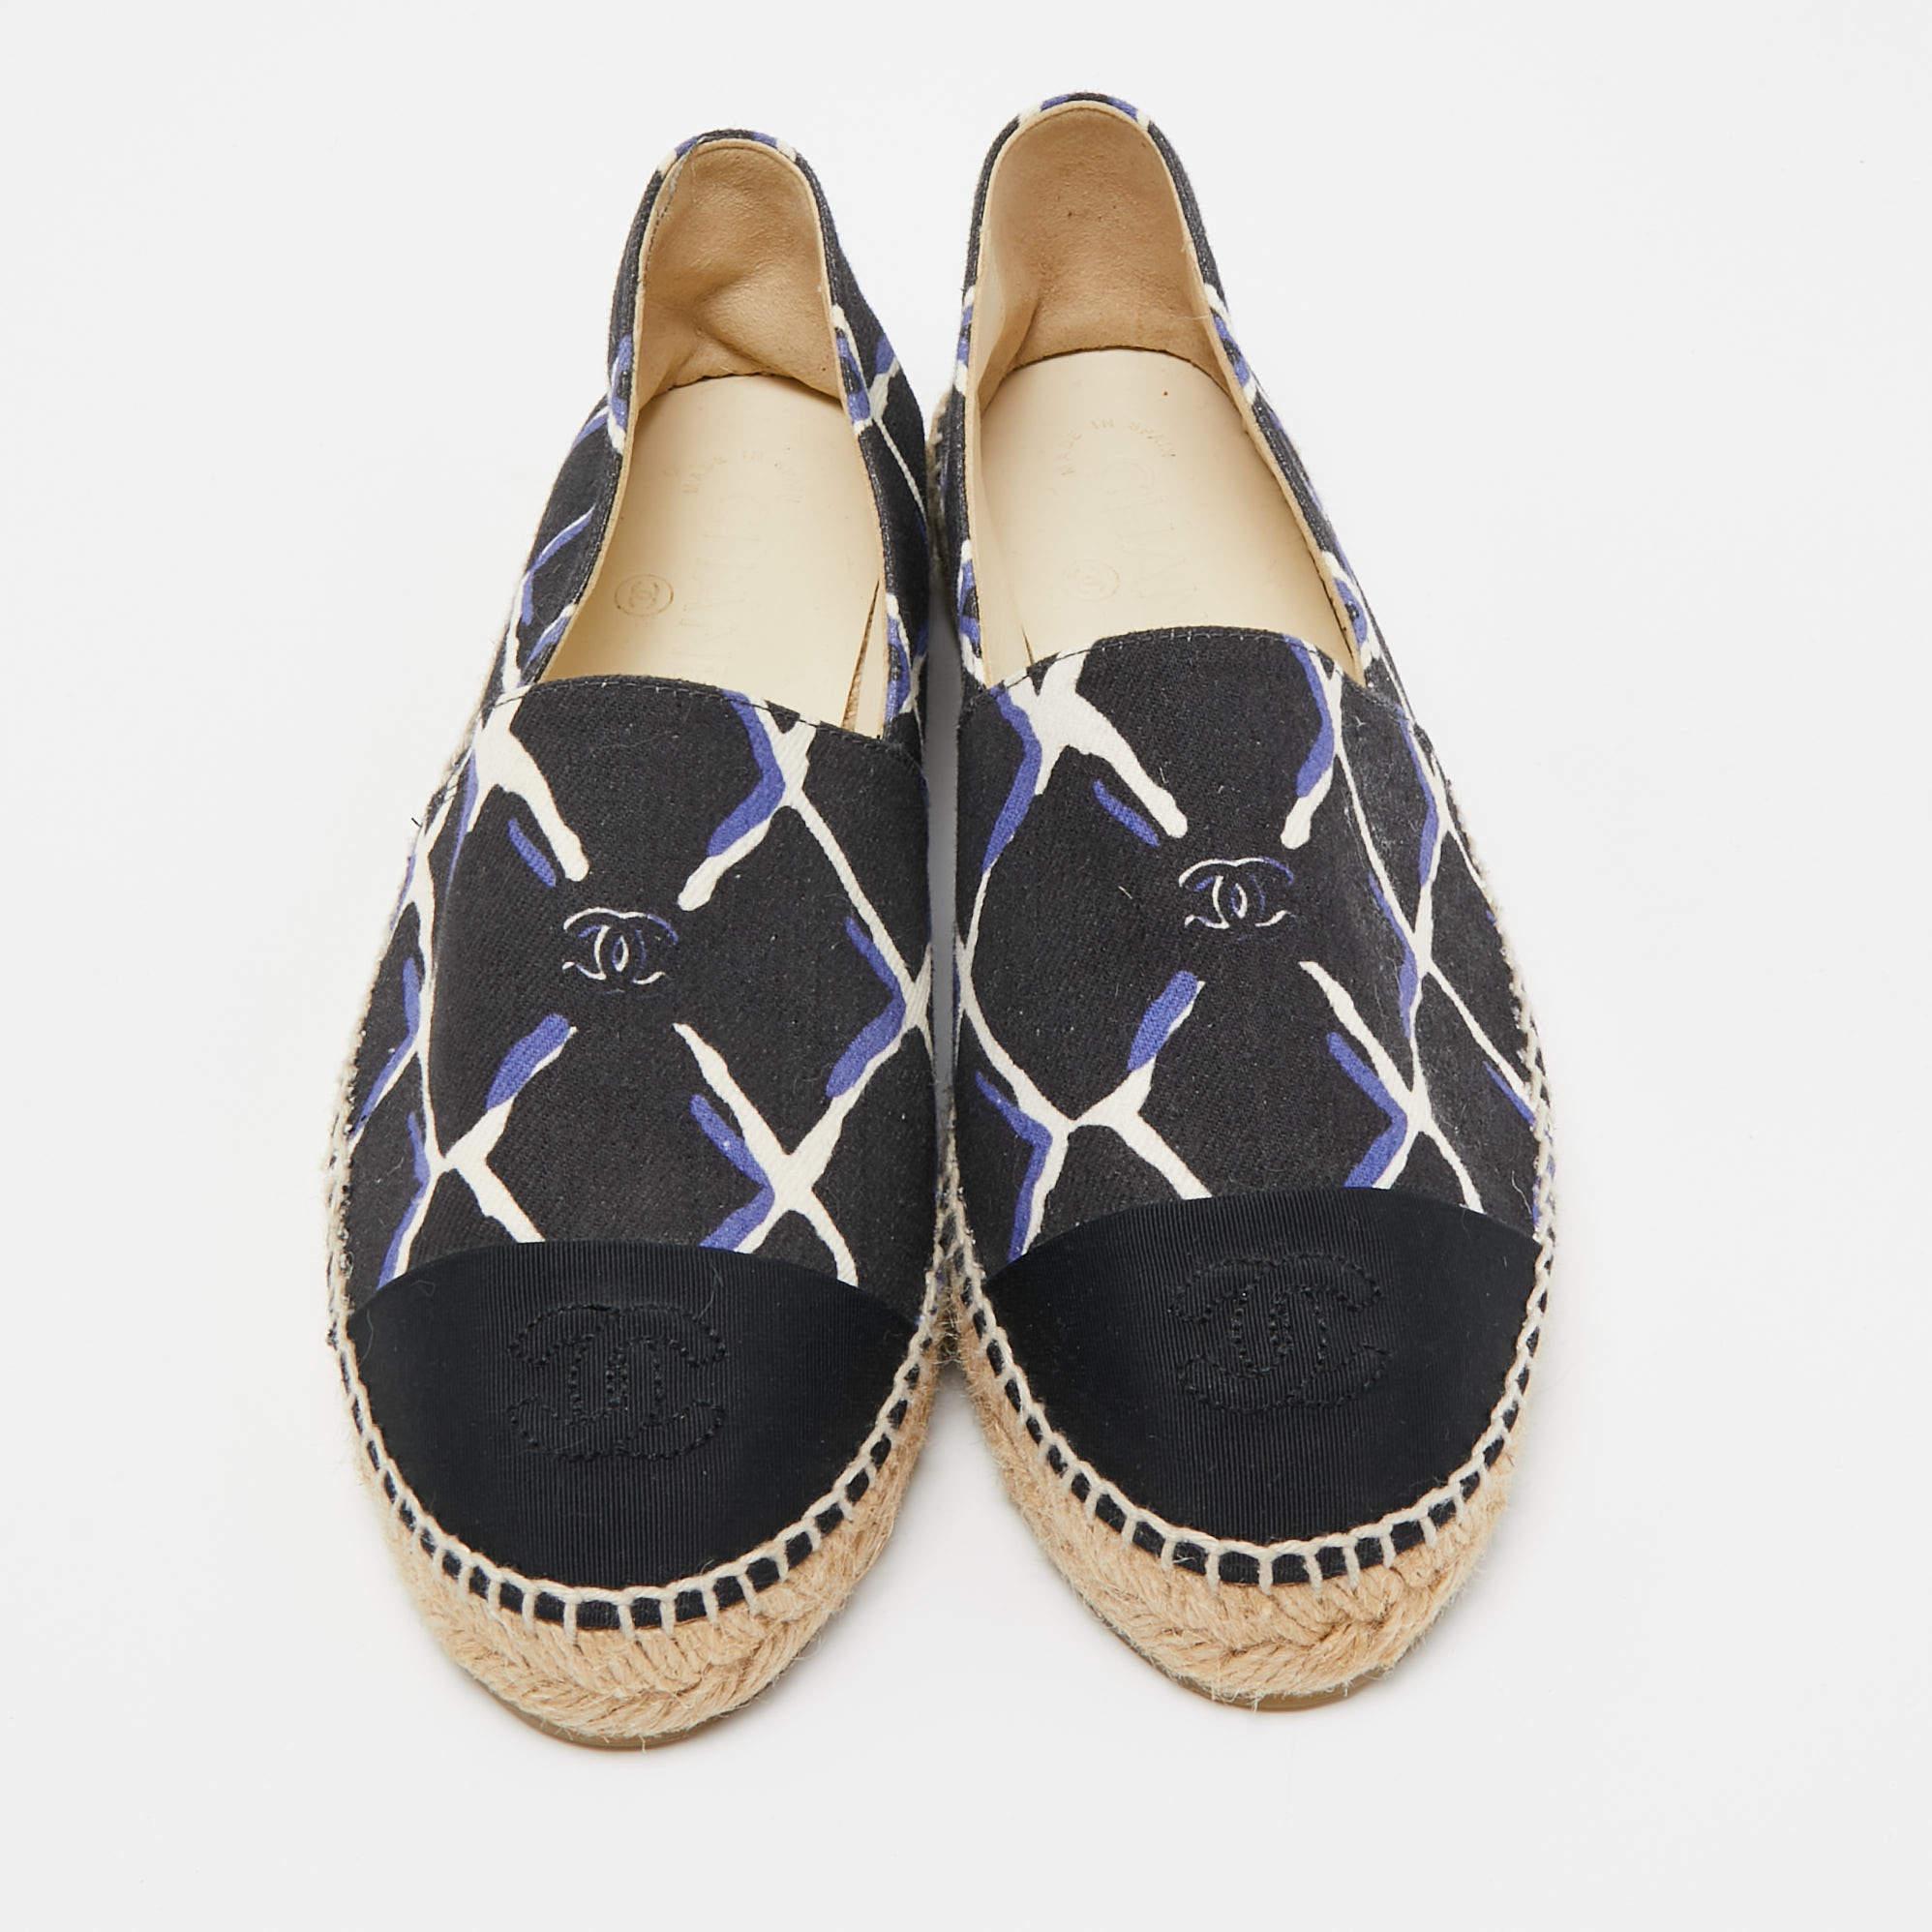 A perfect blend of luxury, style, and comfort, these designer flats are made using quality materials and frame your feet in the most refined way. They can be paired with a host of outfits from your wardrobe.

Includes: Original Dustbag

